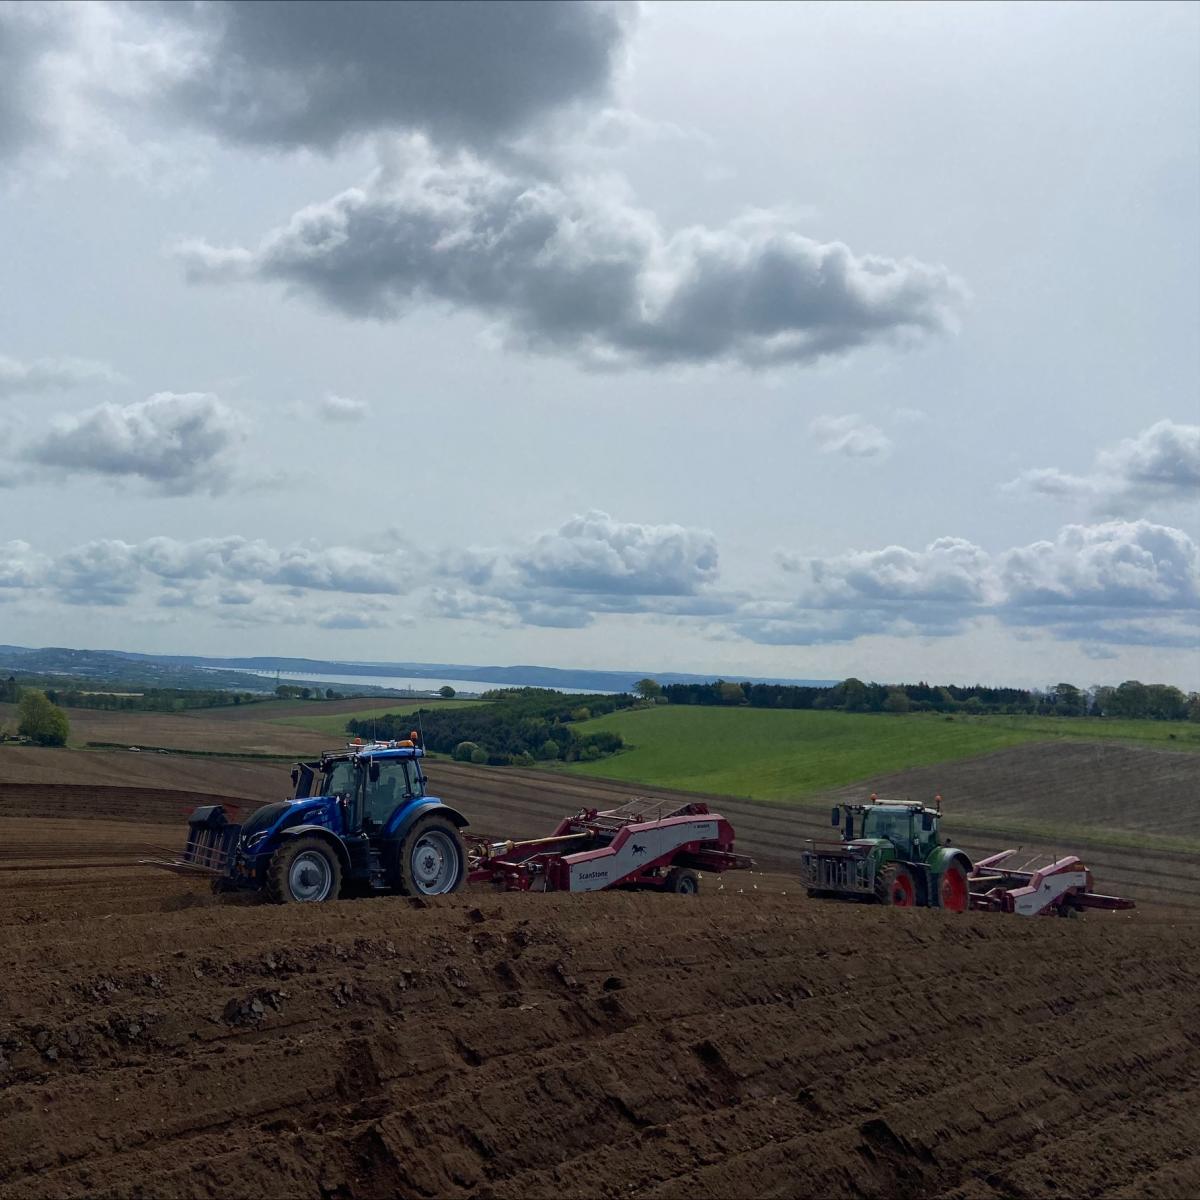 James Wallace - Planting tatties near dundee with a bonnie view of the silvery Tay